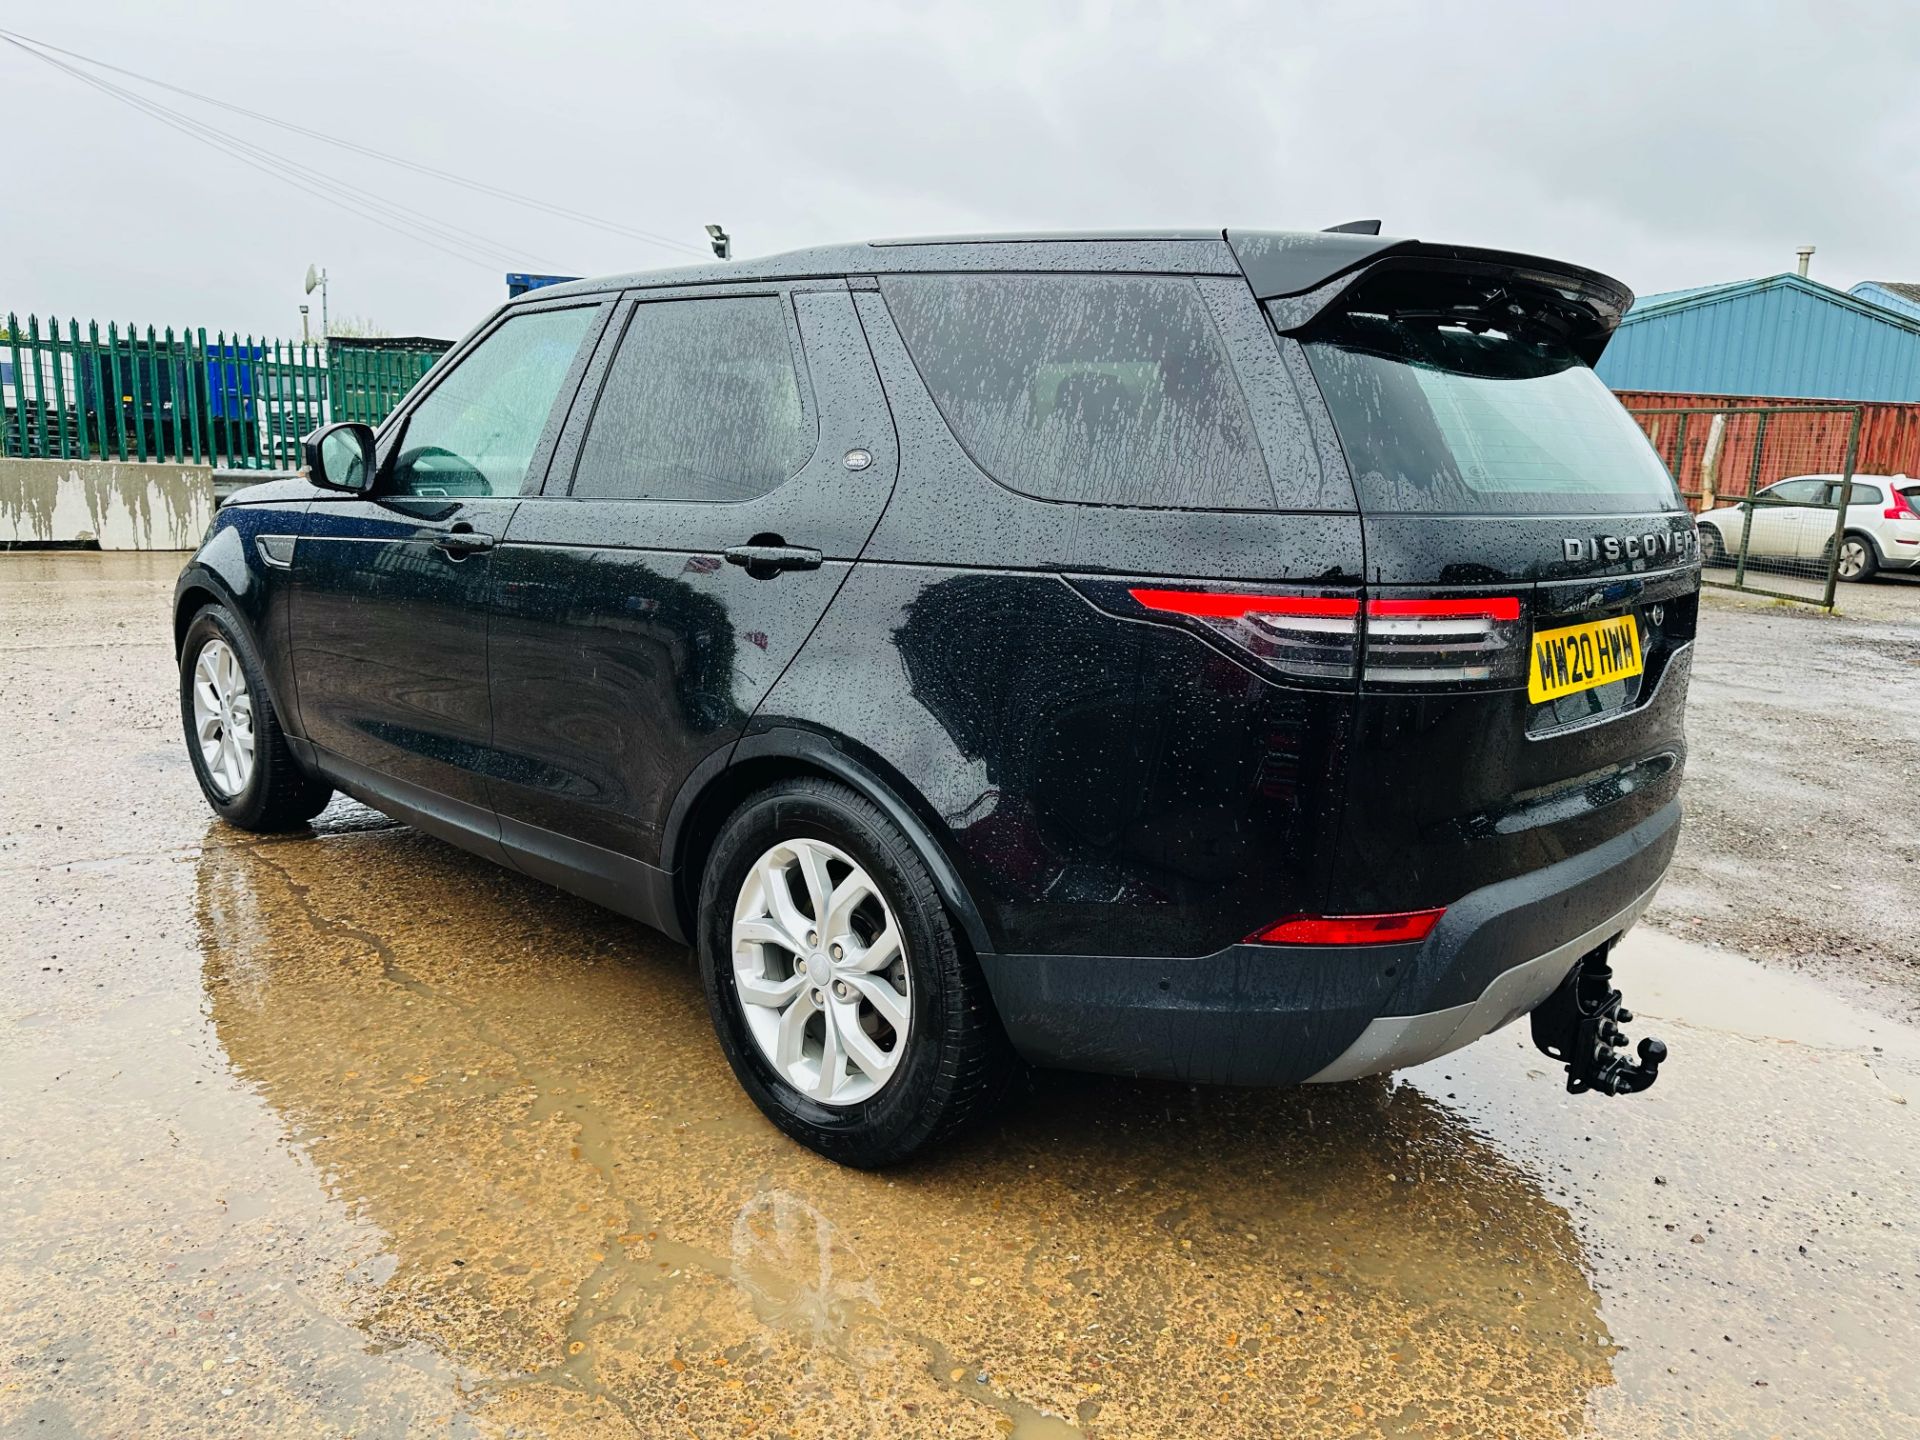 (Reserve Met) Land Rover Discovery SE Automatic (Black Edition) - 2020 Model - Only 57k Miles! - Image 7 of 40